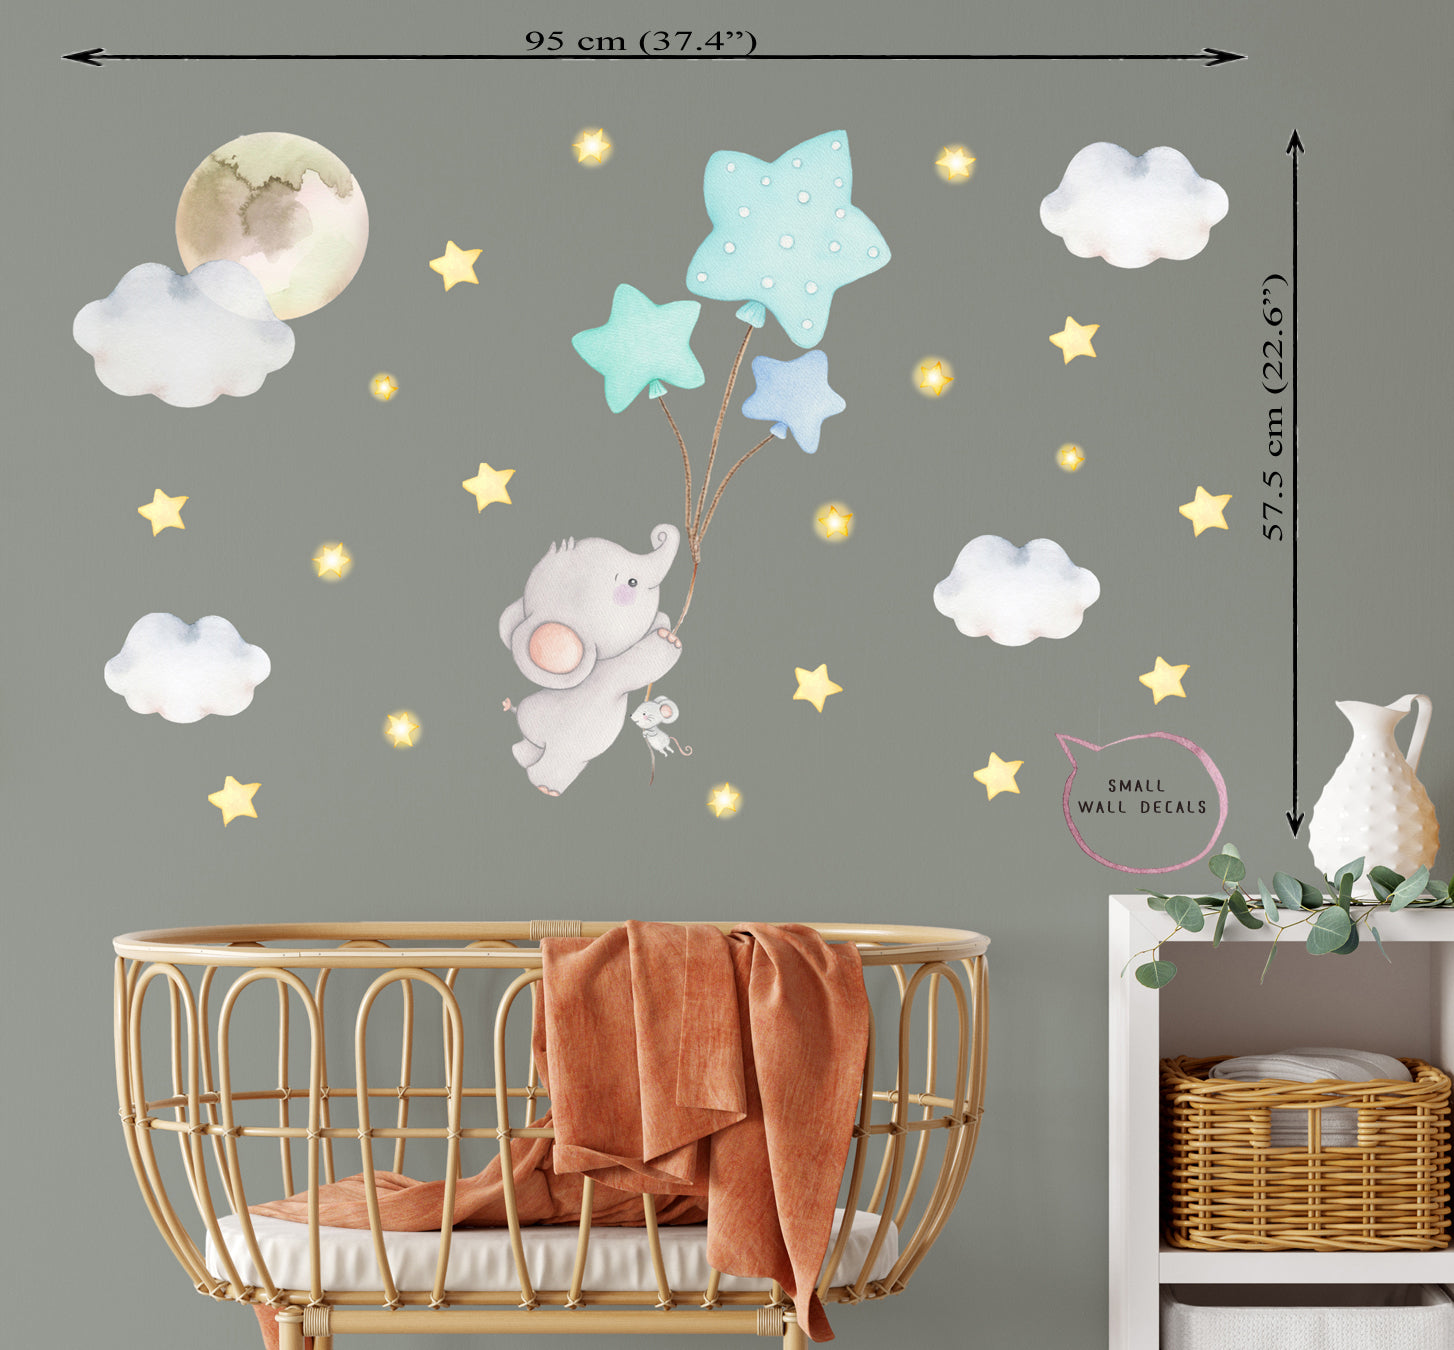 Elephant with balloons. Children's room small wall decals. Gold stars.